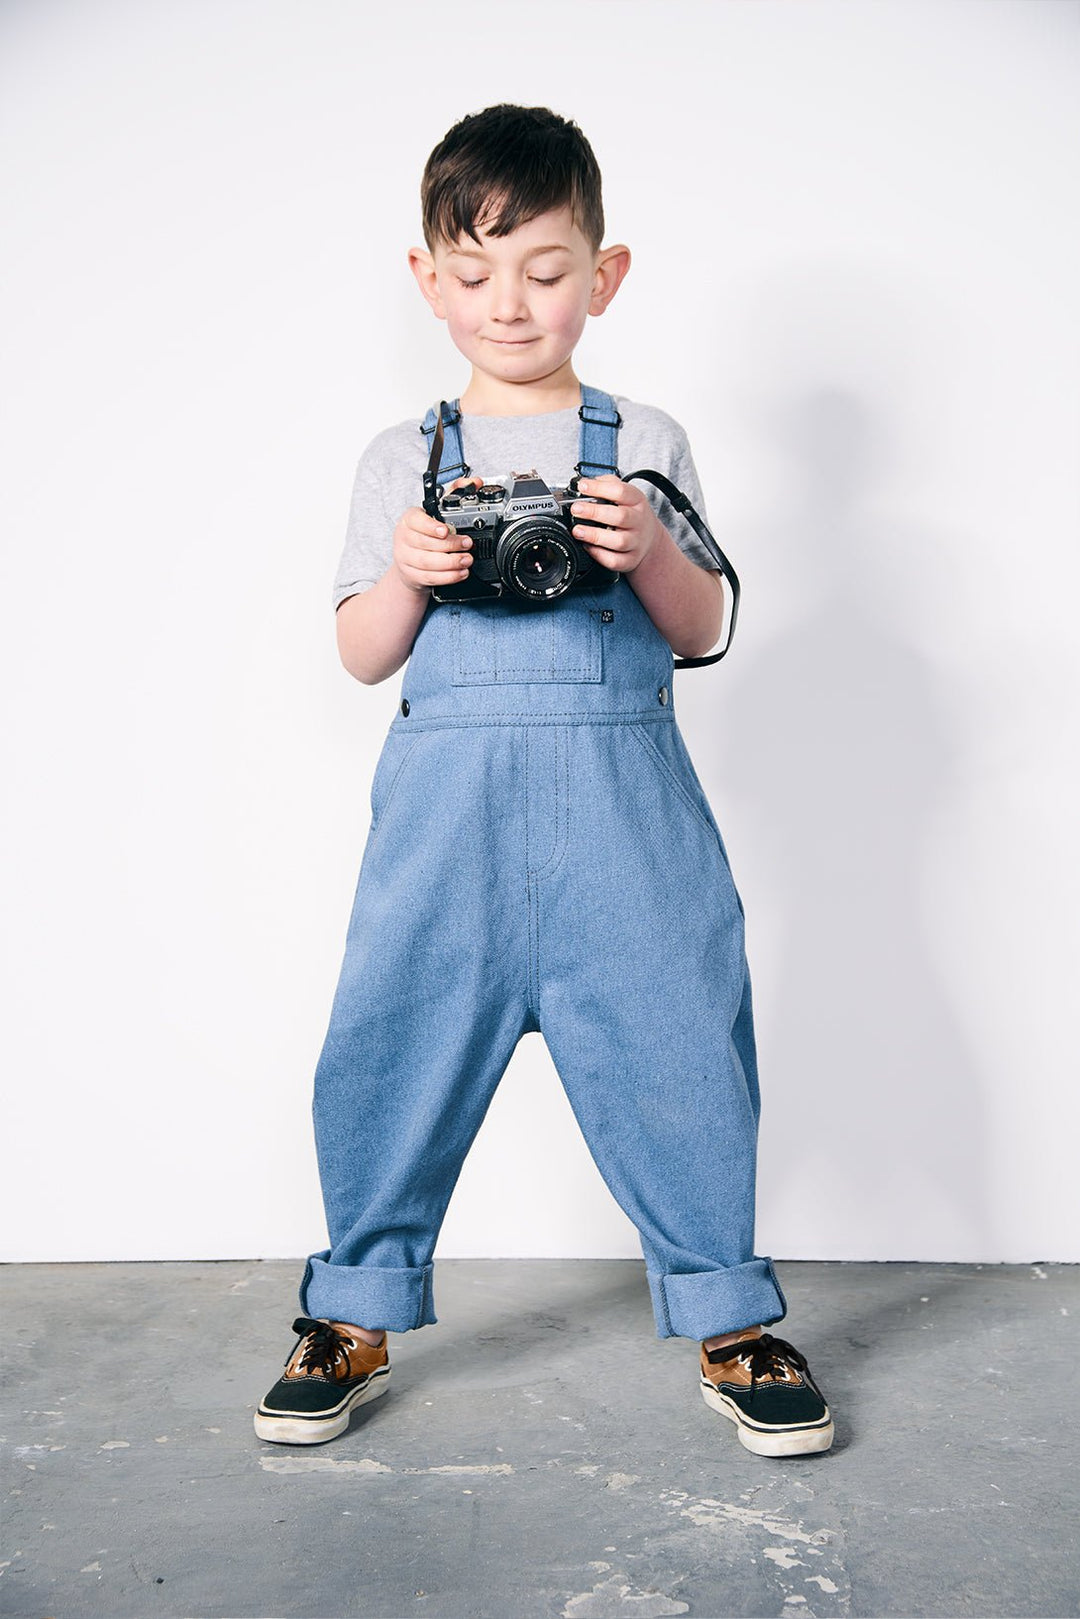 Overalls [unisex kids dungarees handmade in recycled denim] - Over All 1516